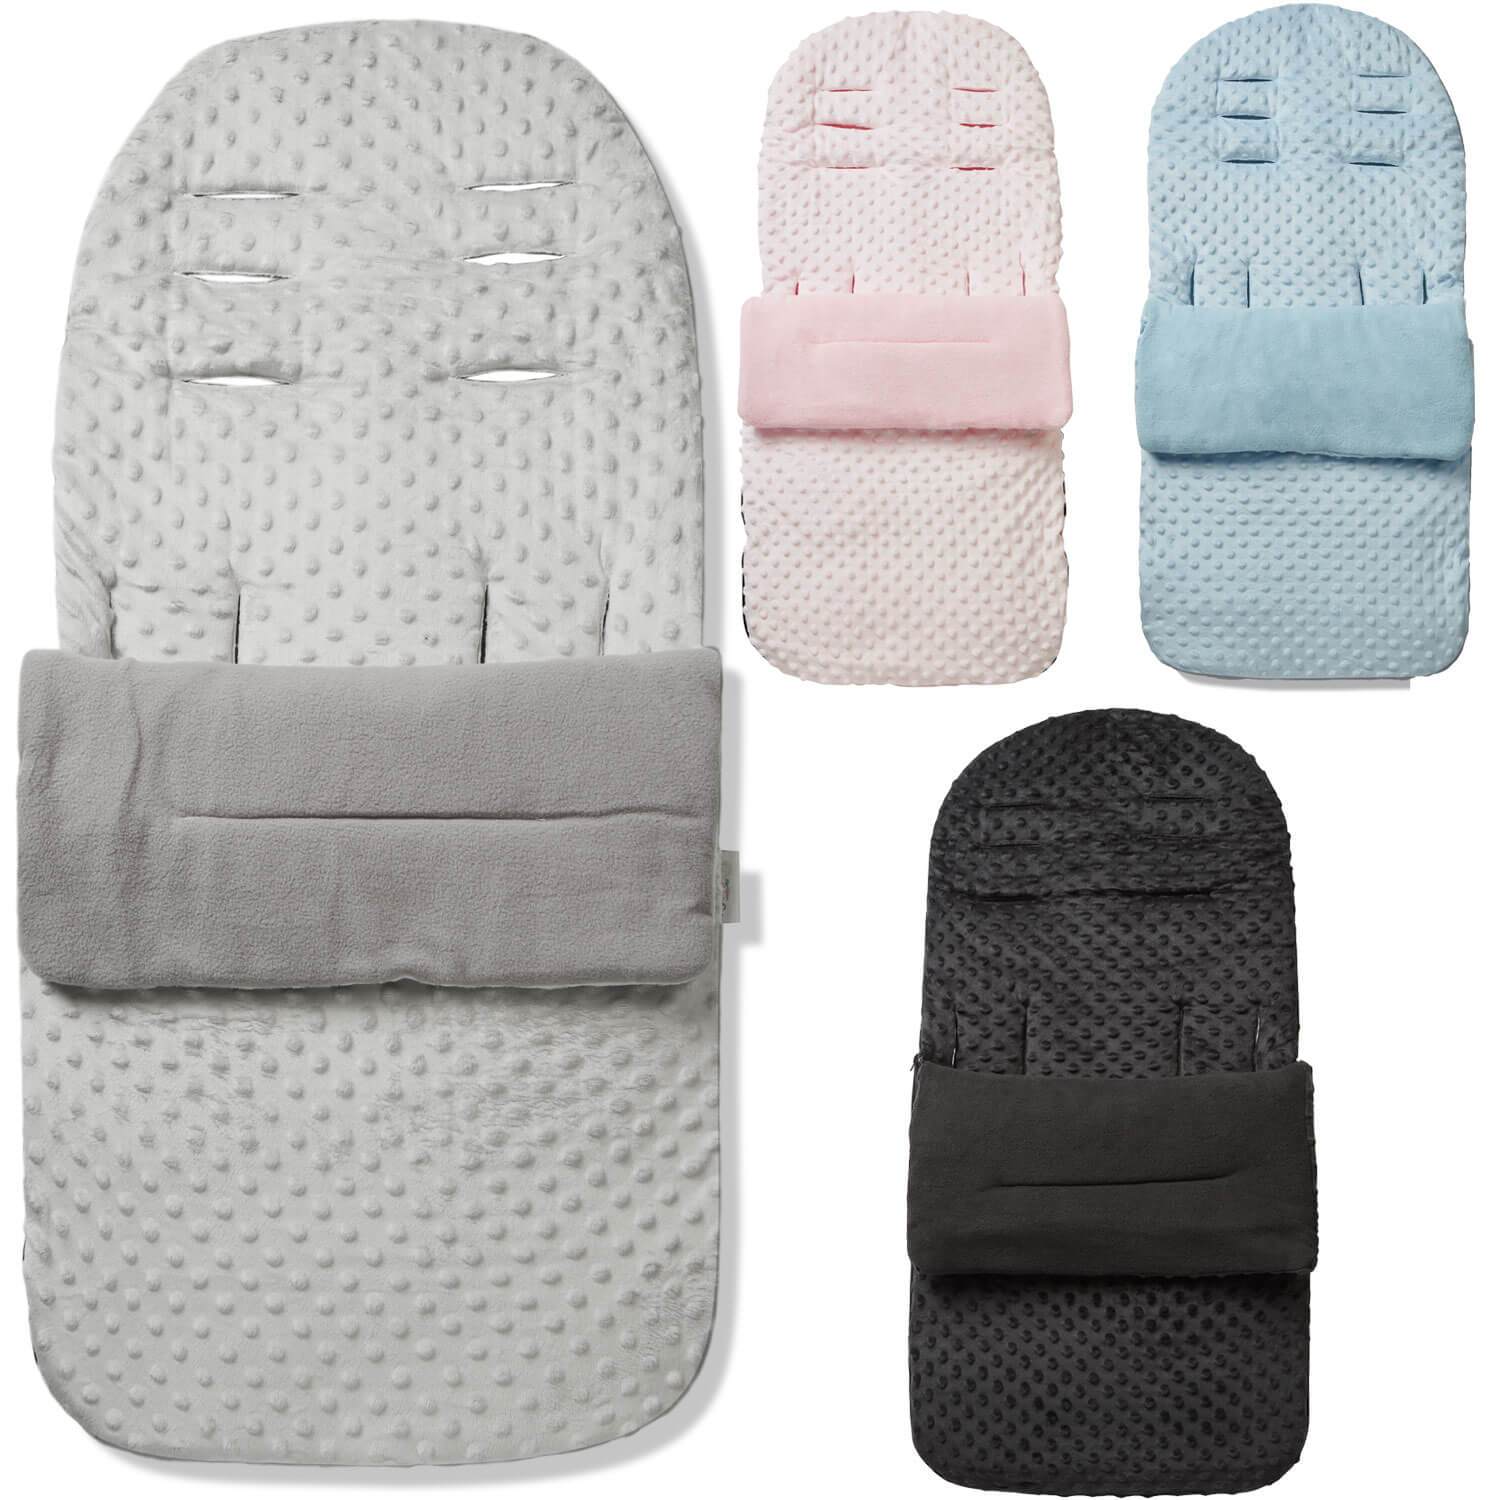 Dimple Footmuff / Cosy Toes Compatible with Mountain Buggy - For Your Little One